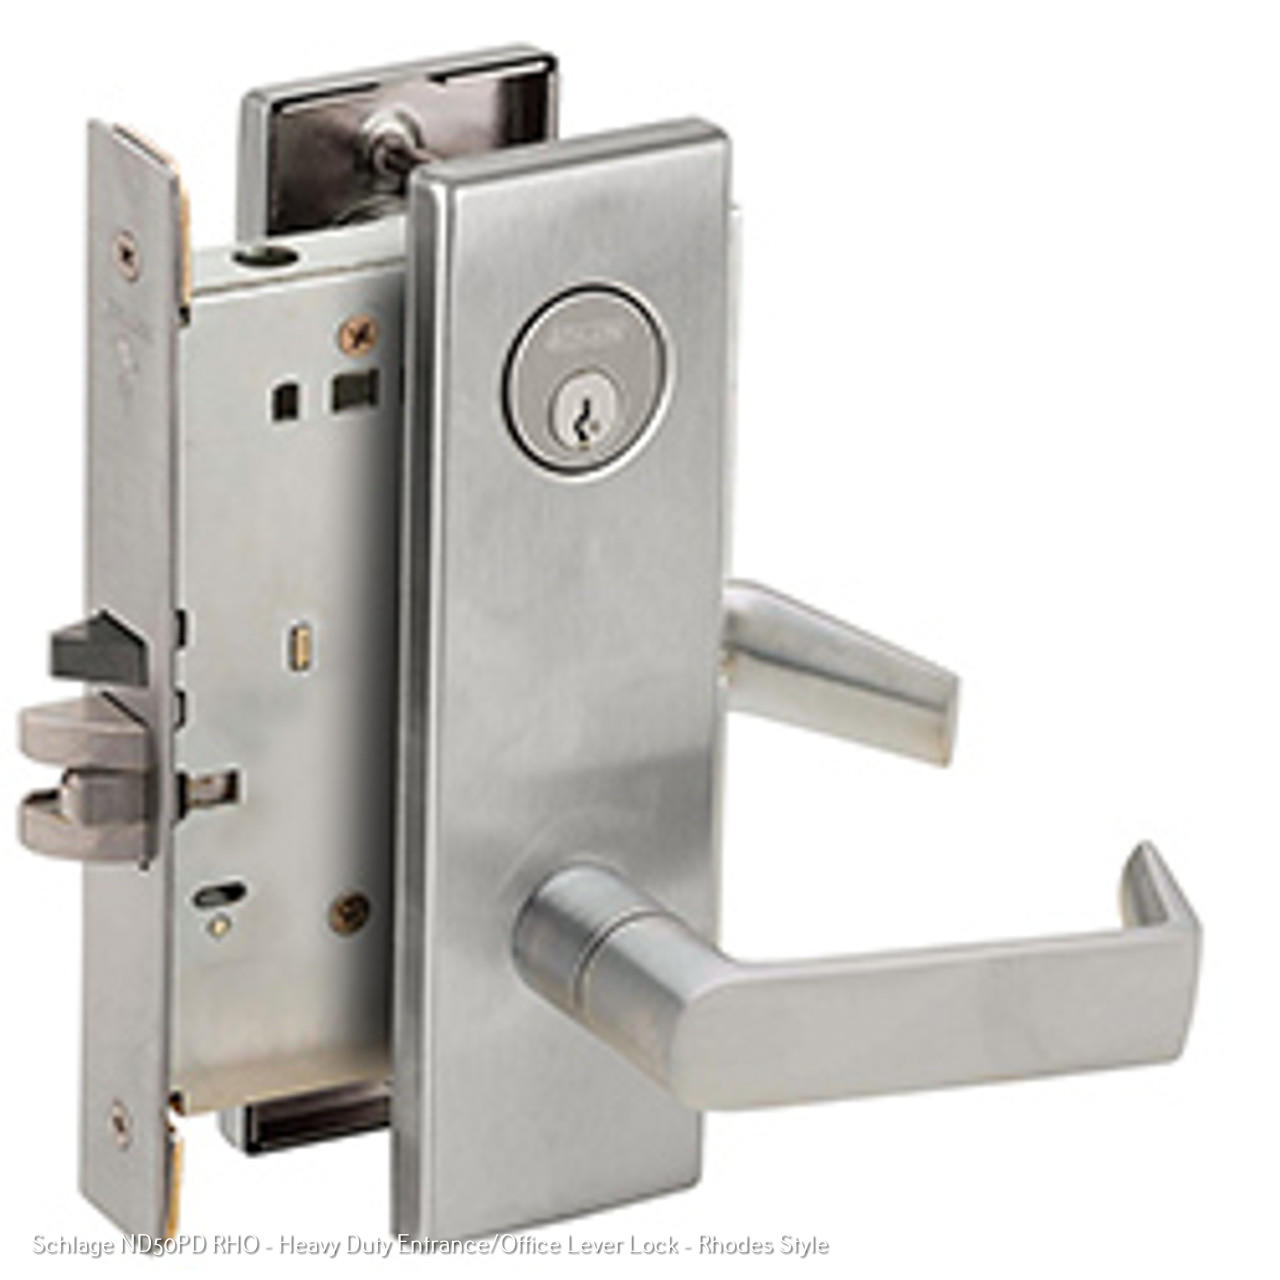 National Lock Supply Highlights the Benefits of Heavy Duty Privacy Lever Locks